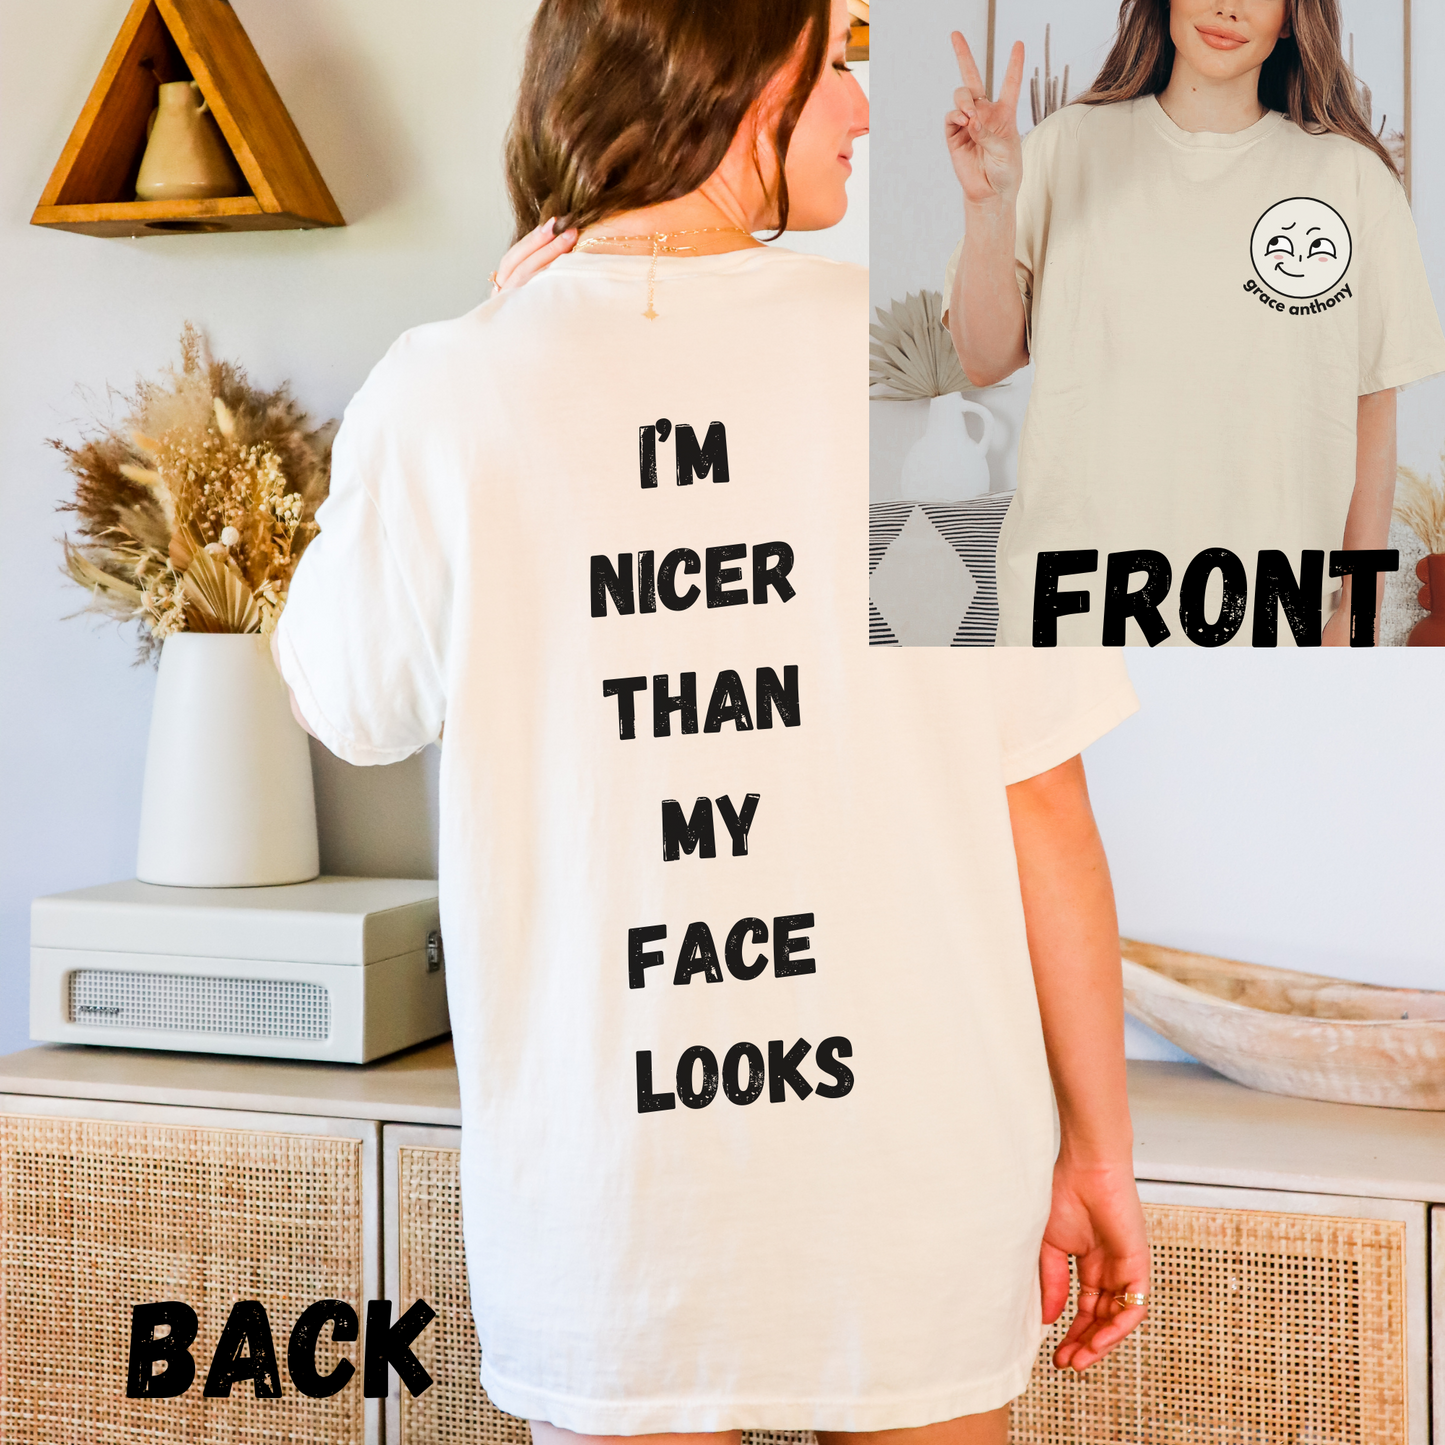 I'm Nicer Than My Face Looks T-Shirt Funny Sarcastic Men Women Shirt Smiley Face Preppy Tshirt Hoodie Oversize Comfort Colors Shirt